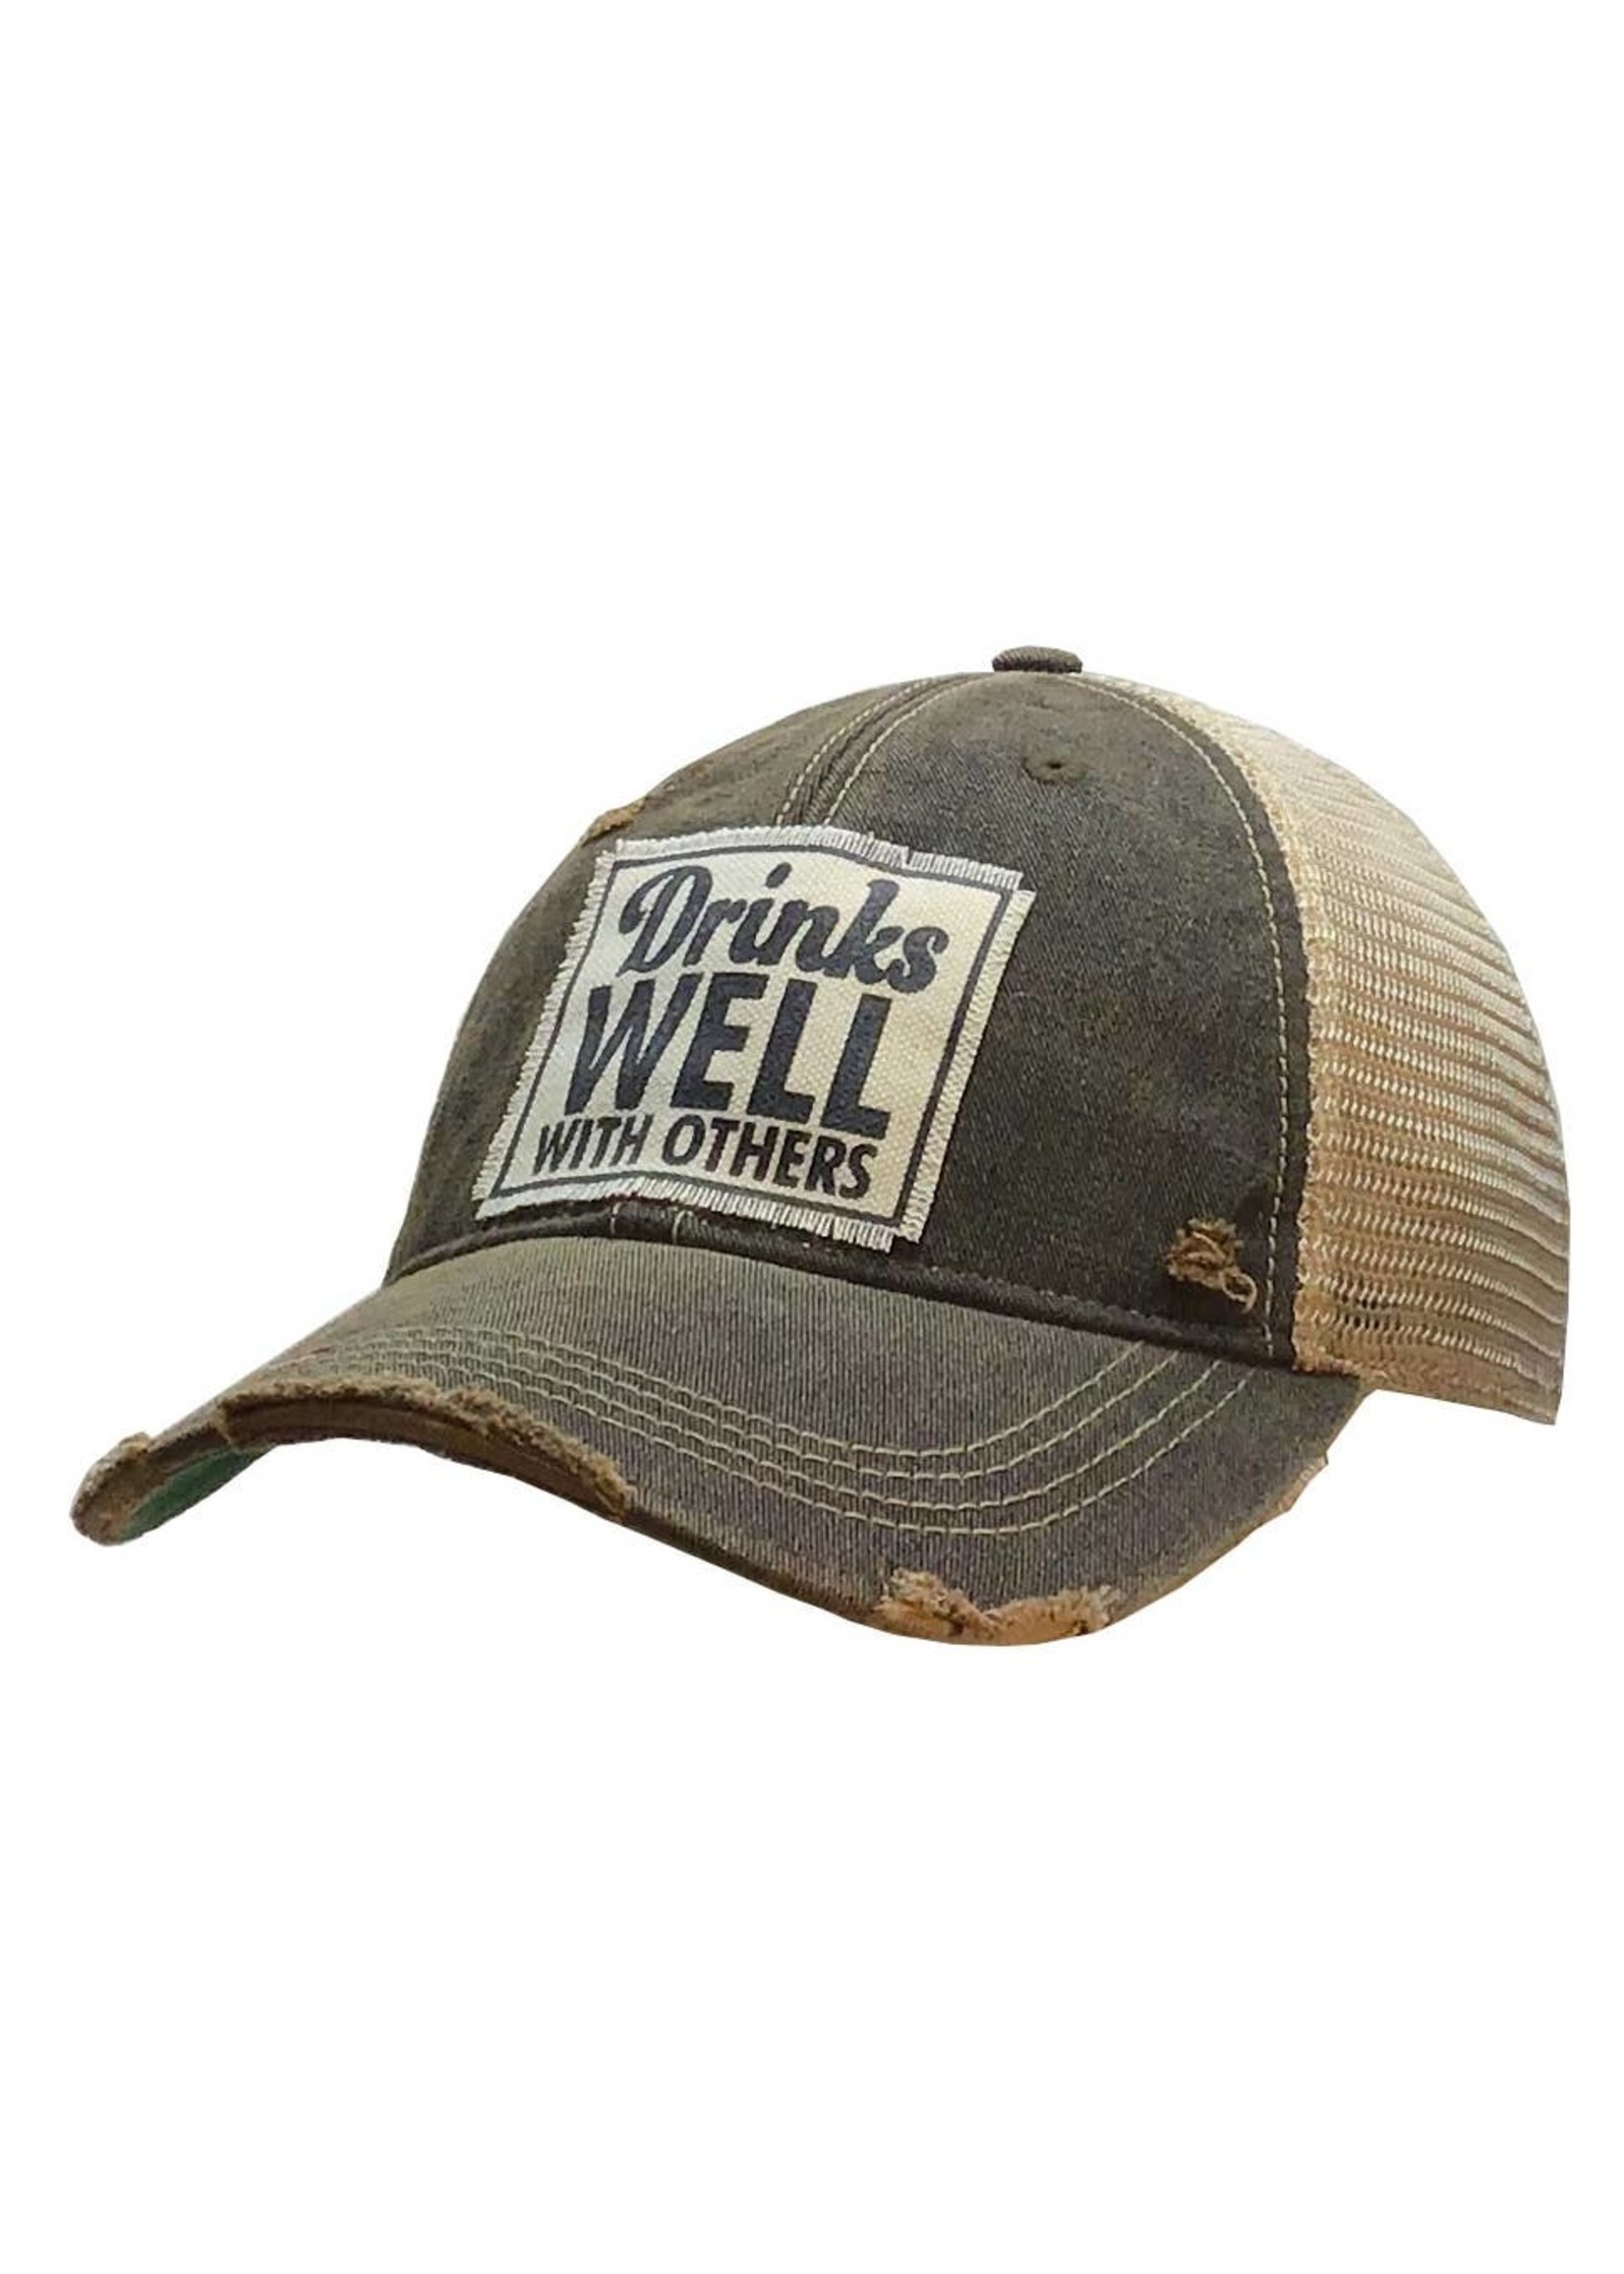 Hat - Drinks Well w/ Others (Black)